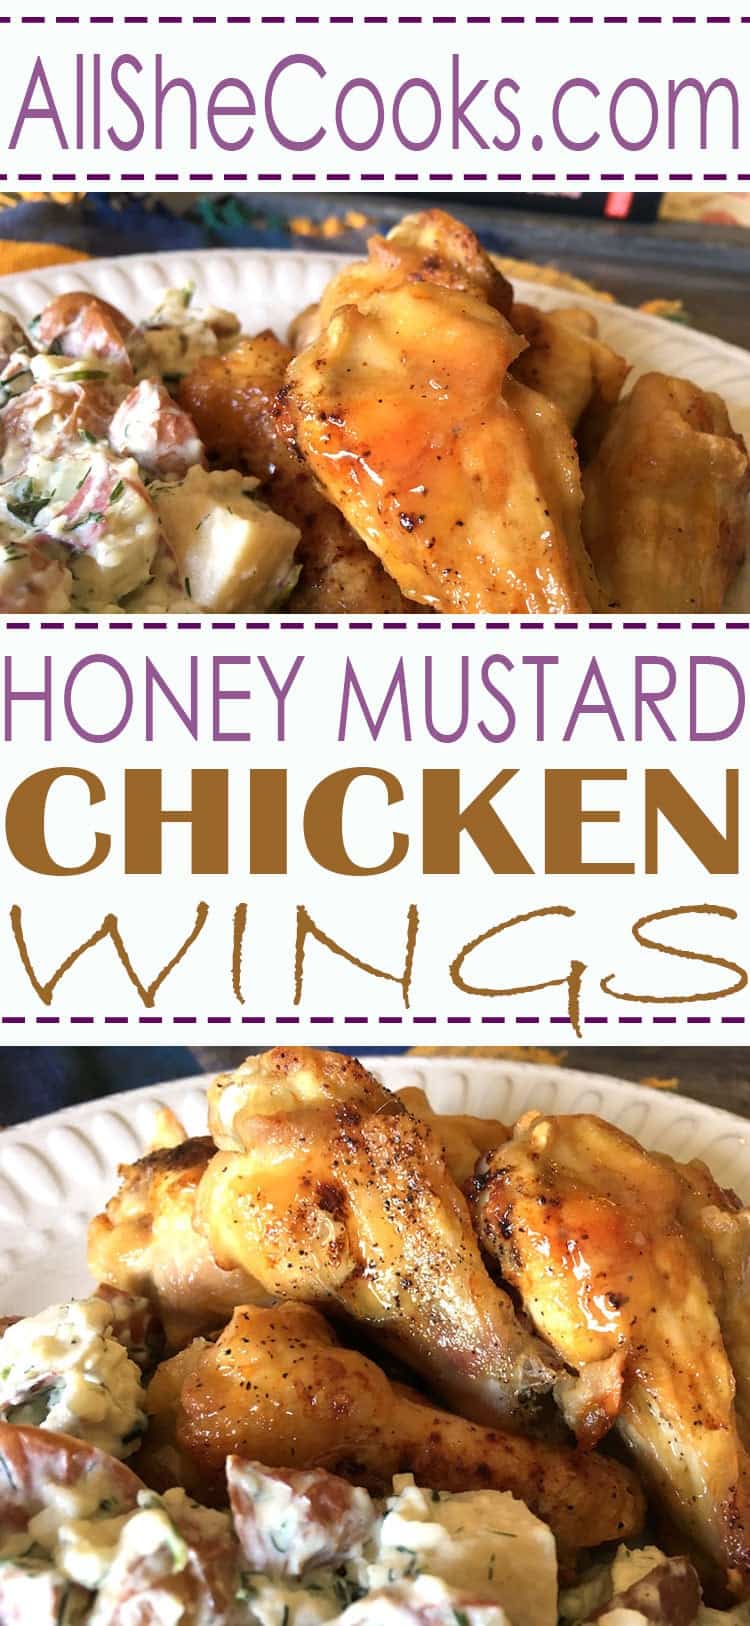 Honey Mustard Chicken Wings Chicken wings are easy to make and are perfect for eating with your fingers. The honey-mustard sauce is delicious.